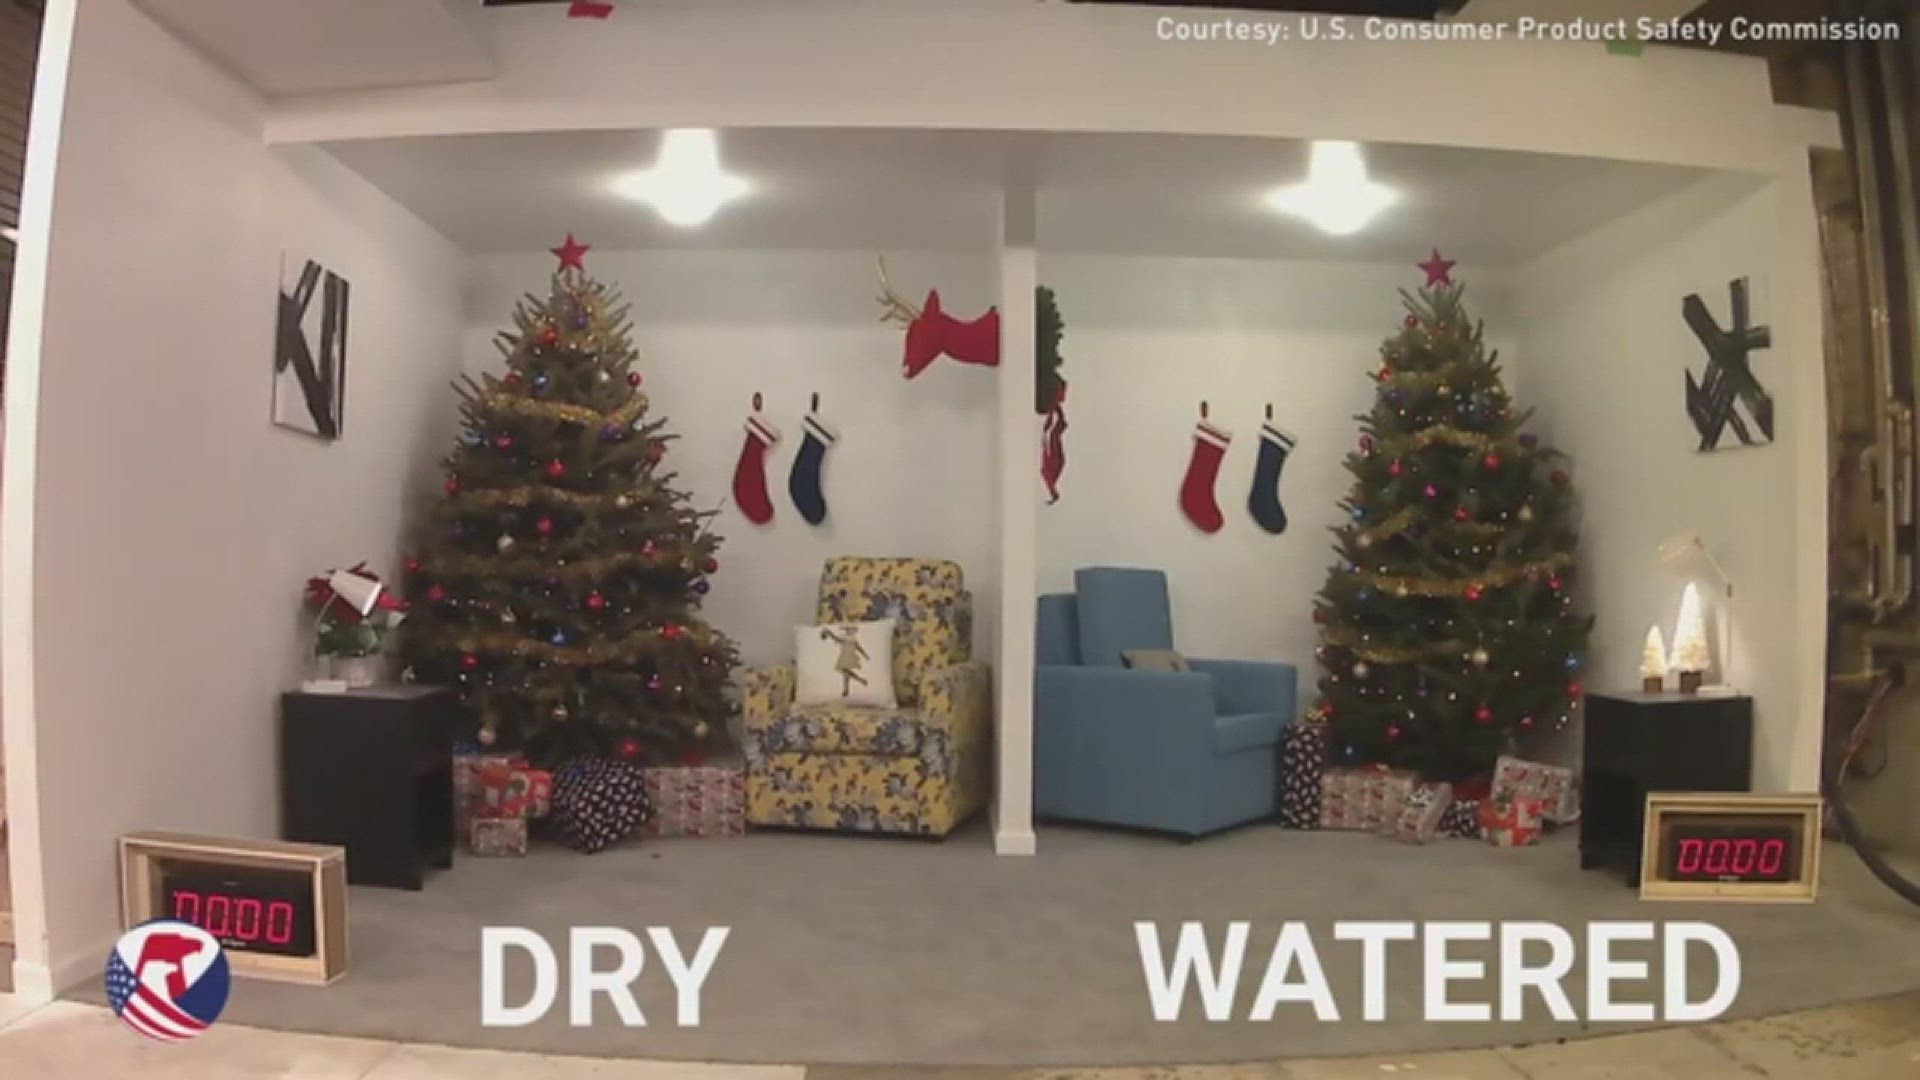 The message from U.S. Consumer Product Safety Commission: "Keep your tree well watered this holiday season."